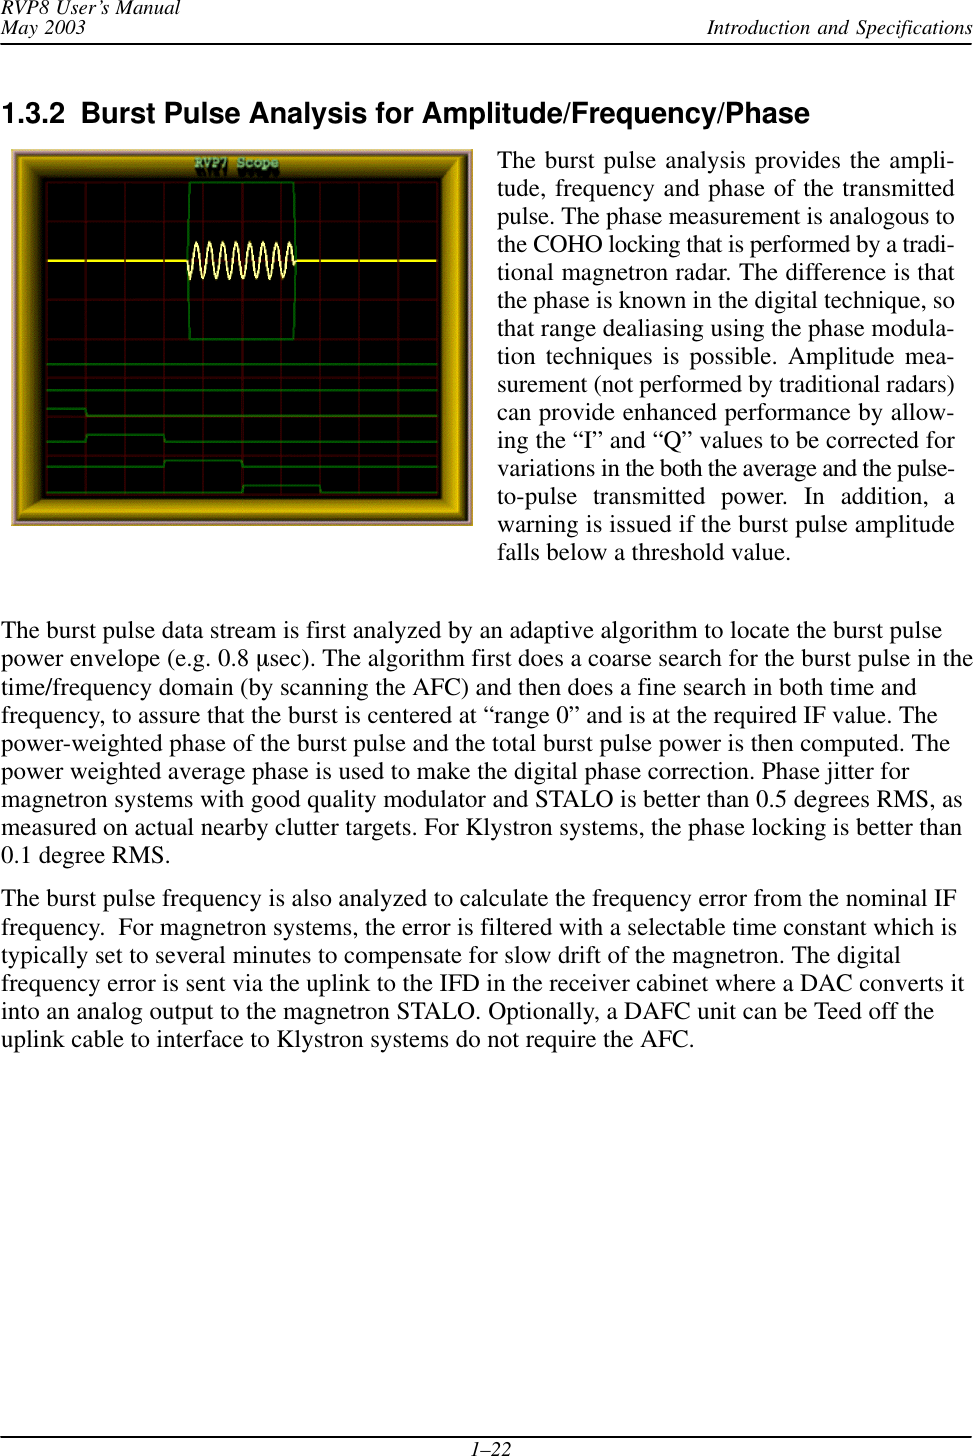 Introduction and SpecificationsRVP8 User’s ManualMay 20031–221.3.2  Burst Pulse Analysis for Amplitude/Frequency/PhaseThe burst pulse analysis provides the ampli-tude, frequency and phase of the transmittedpulse. The phase measurement is analogous tothe COHO locking that is performed by a tradi-tional magnetron radar. The difference is thatthe phase is known in the digital technique, sothat range dealiasing using the phase modula-tion techniques is possible. Amplitude mea-surement (not performed by traditional radars)can provide enhanced performance by allow-ing the “I” and “Q” values to be corrected forvariations in the both the average and the pulse-to-pulse transmitted power. In addition, awarning is issued if the burst pulse amplitudefalls below a threshold value.The burst pulse data stream is first analyzed by an adaptive algorithm to locate the burst pulsepower envelope (e.g. 0.8 sec). The algorithm first does a coarse search for the burst pulse in thetime/frequency domain (by scanning the AFC) and then does a fine search in both time andfrequency, to assure that the burst is centered at “range 0” and is at the required IF value. Thepower-weighted phase of the burst pulse and the total burst pulse power is then computed. Thepower weighted average phase is used to make the digital phase correction. Phase jitter formagnetron systems with good quality modulator and STALO is better than 0.5 degrees RMS, asmeasured on actual nearby clutter targets. For Klystron systems, the phase locking is better than0.1 degree RMS.The burst pulse frequency is also analyzed to calculate the frequency error from the nominal IFfrequency.  For magnetron systems, the error is filtered with a selectable time constant which istypically set to several minutes to compensate for slow drift of the magnetron. The digitalfrequency error is sent via the uplink to the IFD in the receiver cabinet where a DAC converts itinto an analog output to the magnetron STALO. Optionally, a DAFC unit can be Teed off theuplink cable to interface to Klystron systems do not require the AFC.